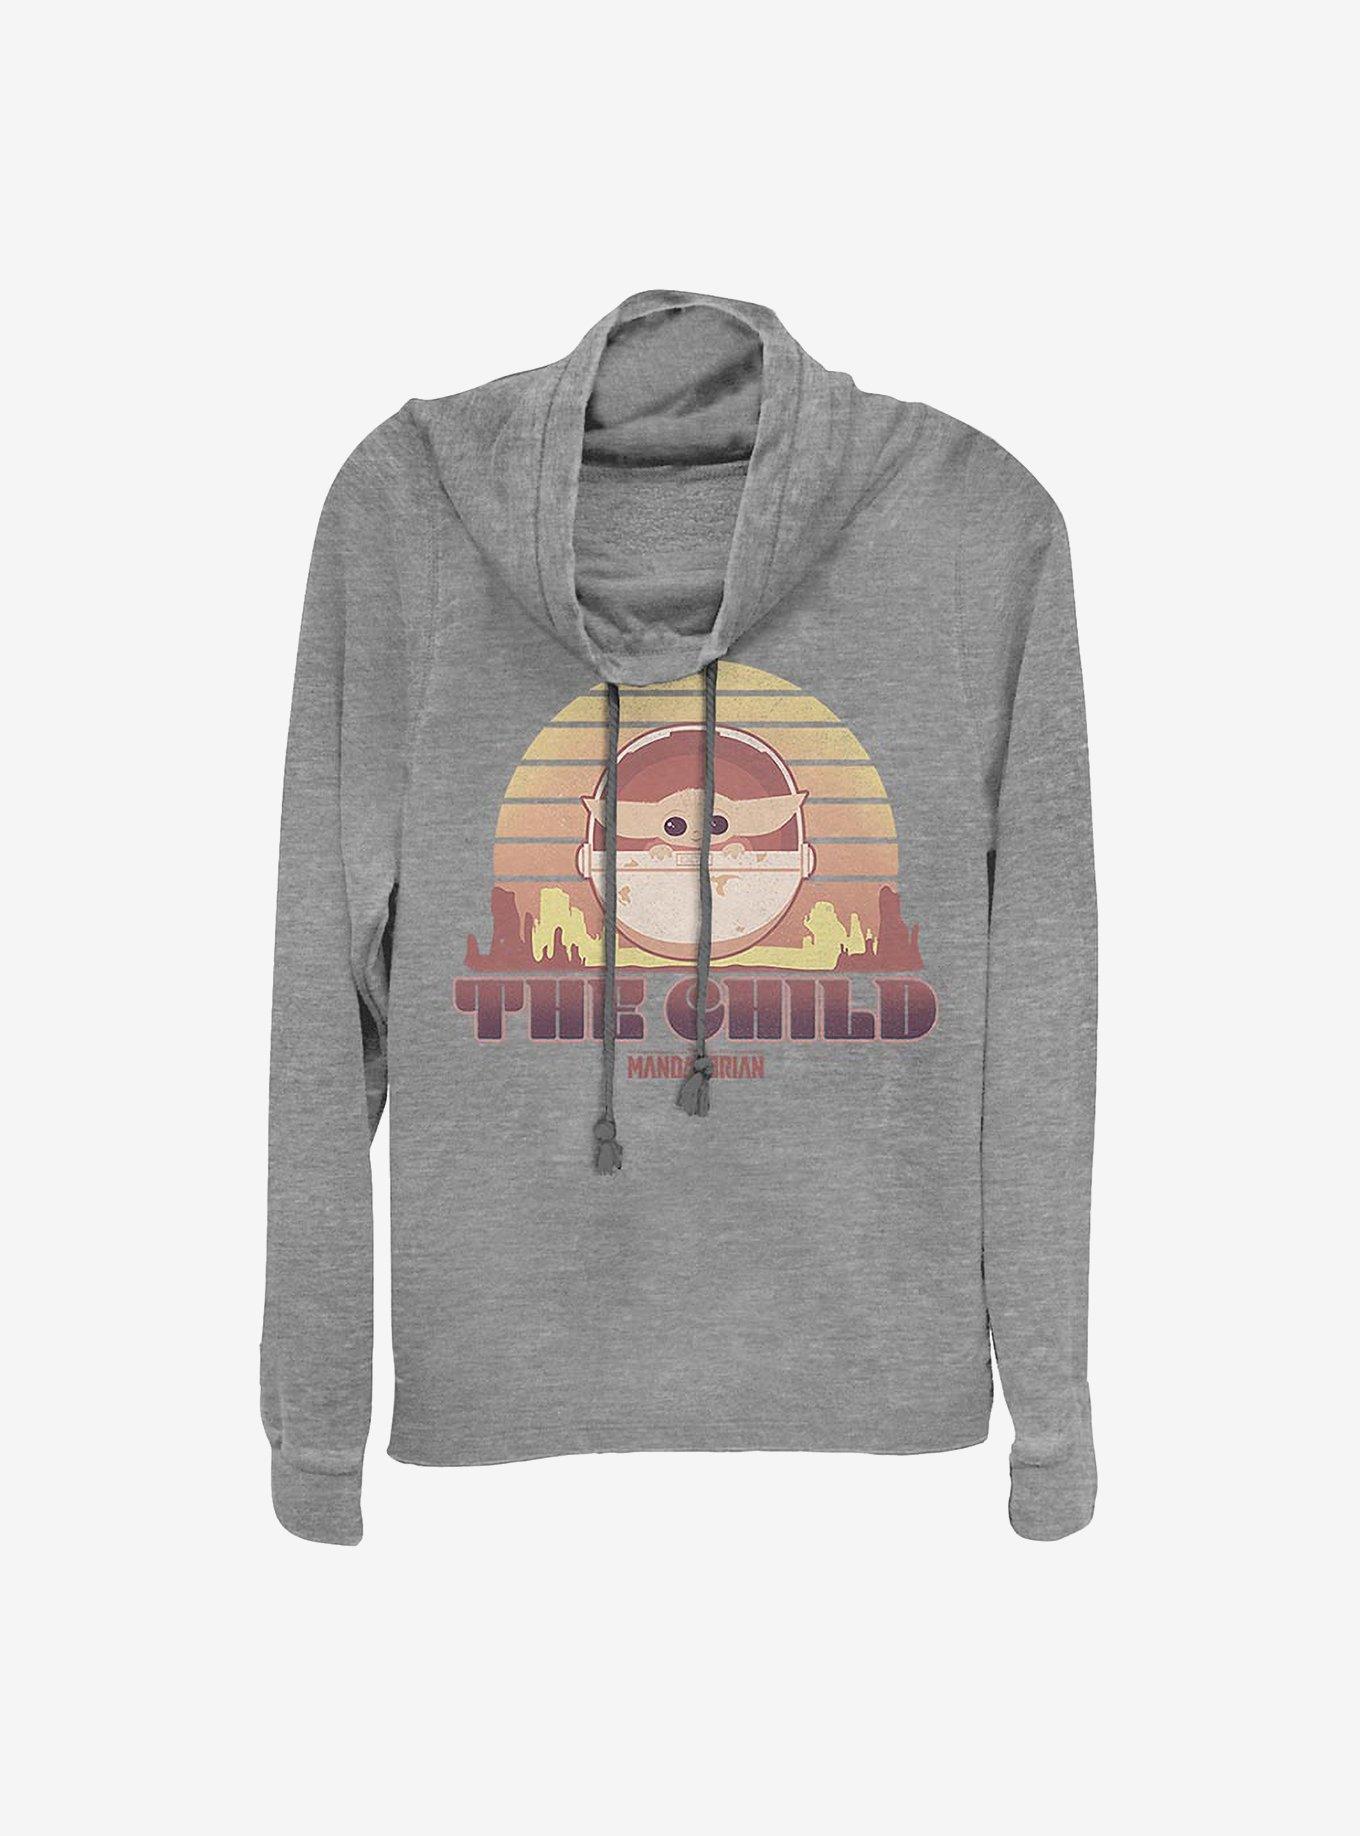 Star Wars The Mandalorian Sunset The Child Cowlneck Long-Sleeve Girls Top, GRAY HTR, hi-res